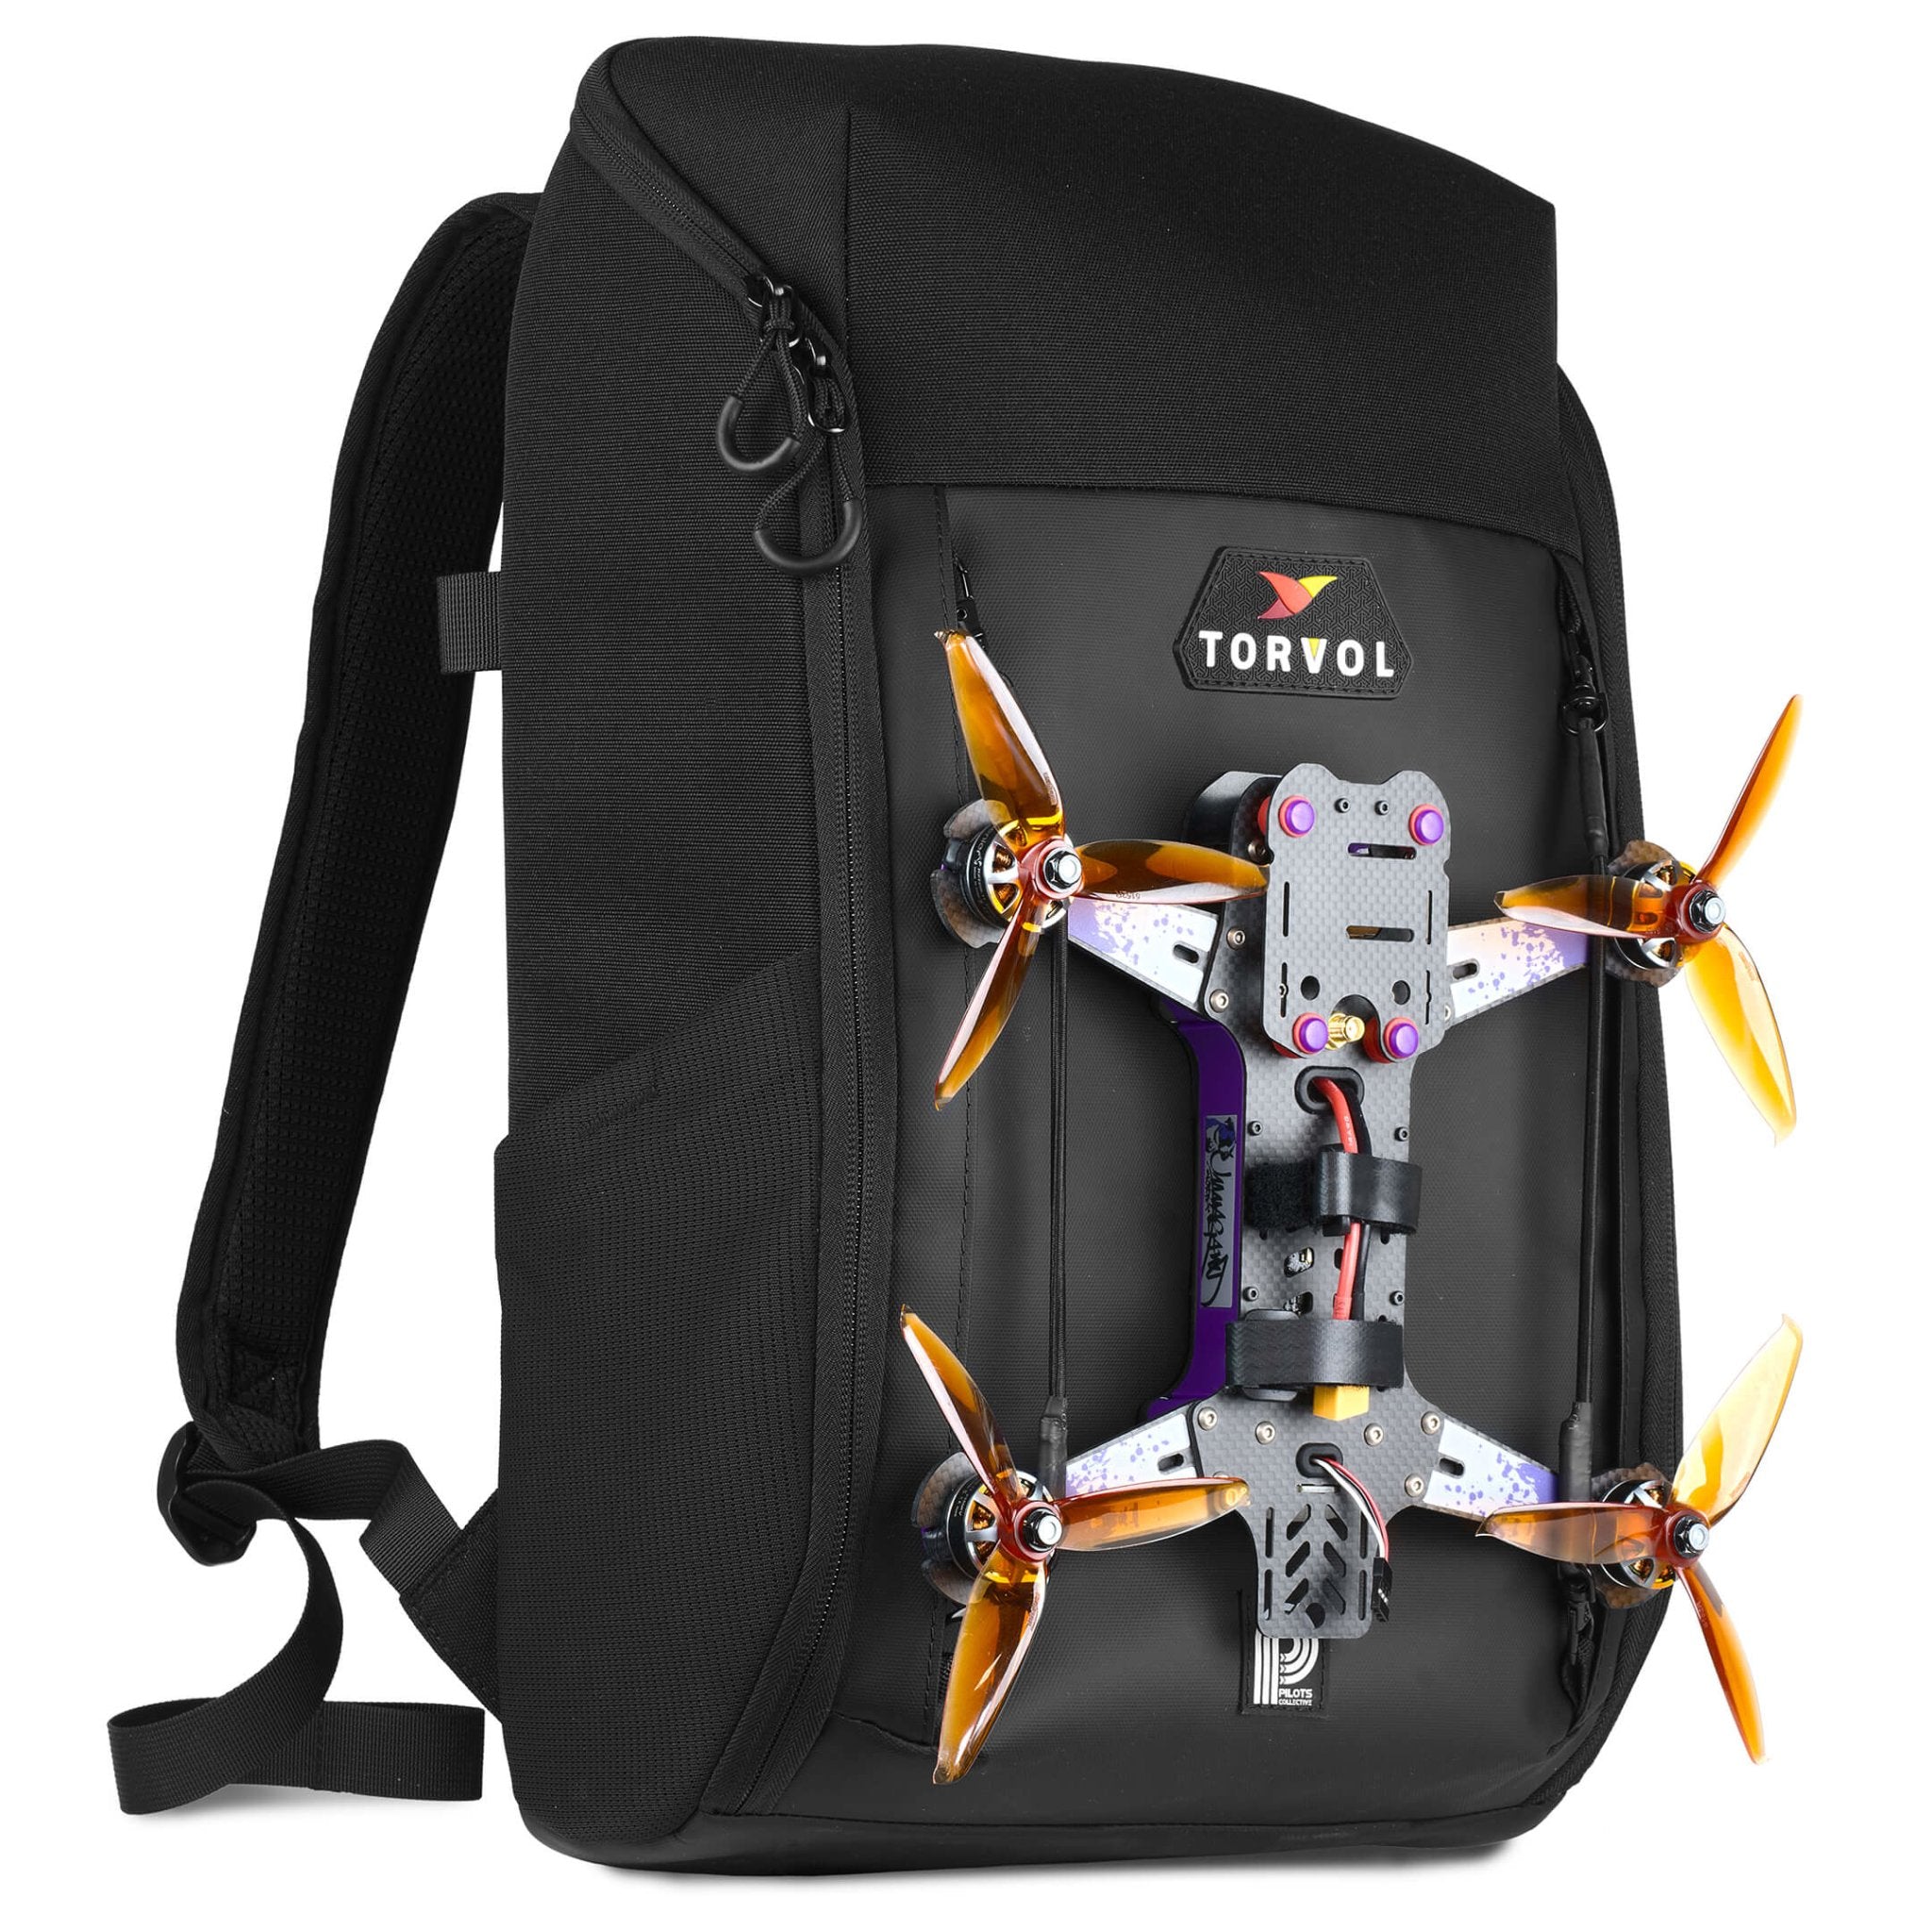 Torvol Urban Backpack - The Ultimate Daily Backpack 1 - Torvol - Drone Authority